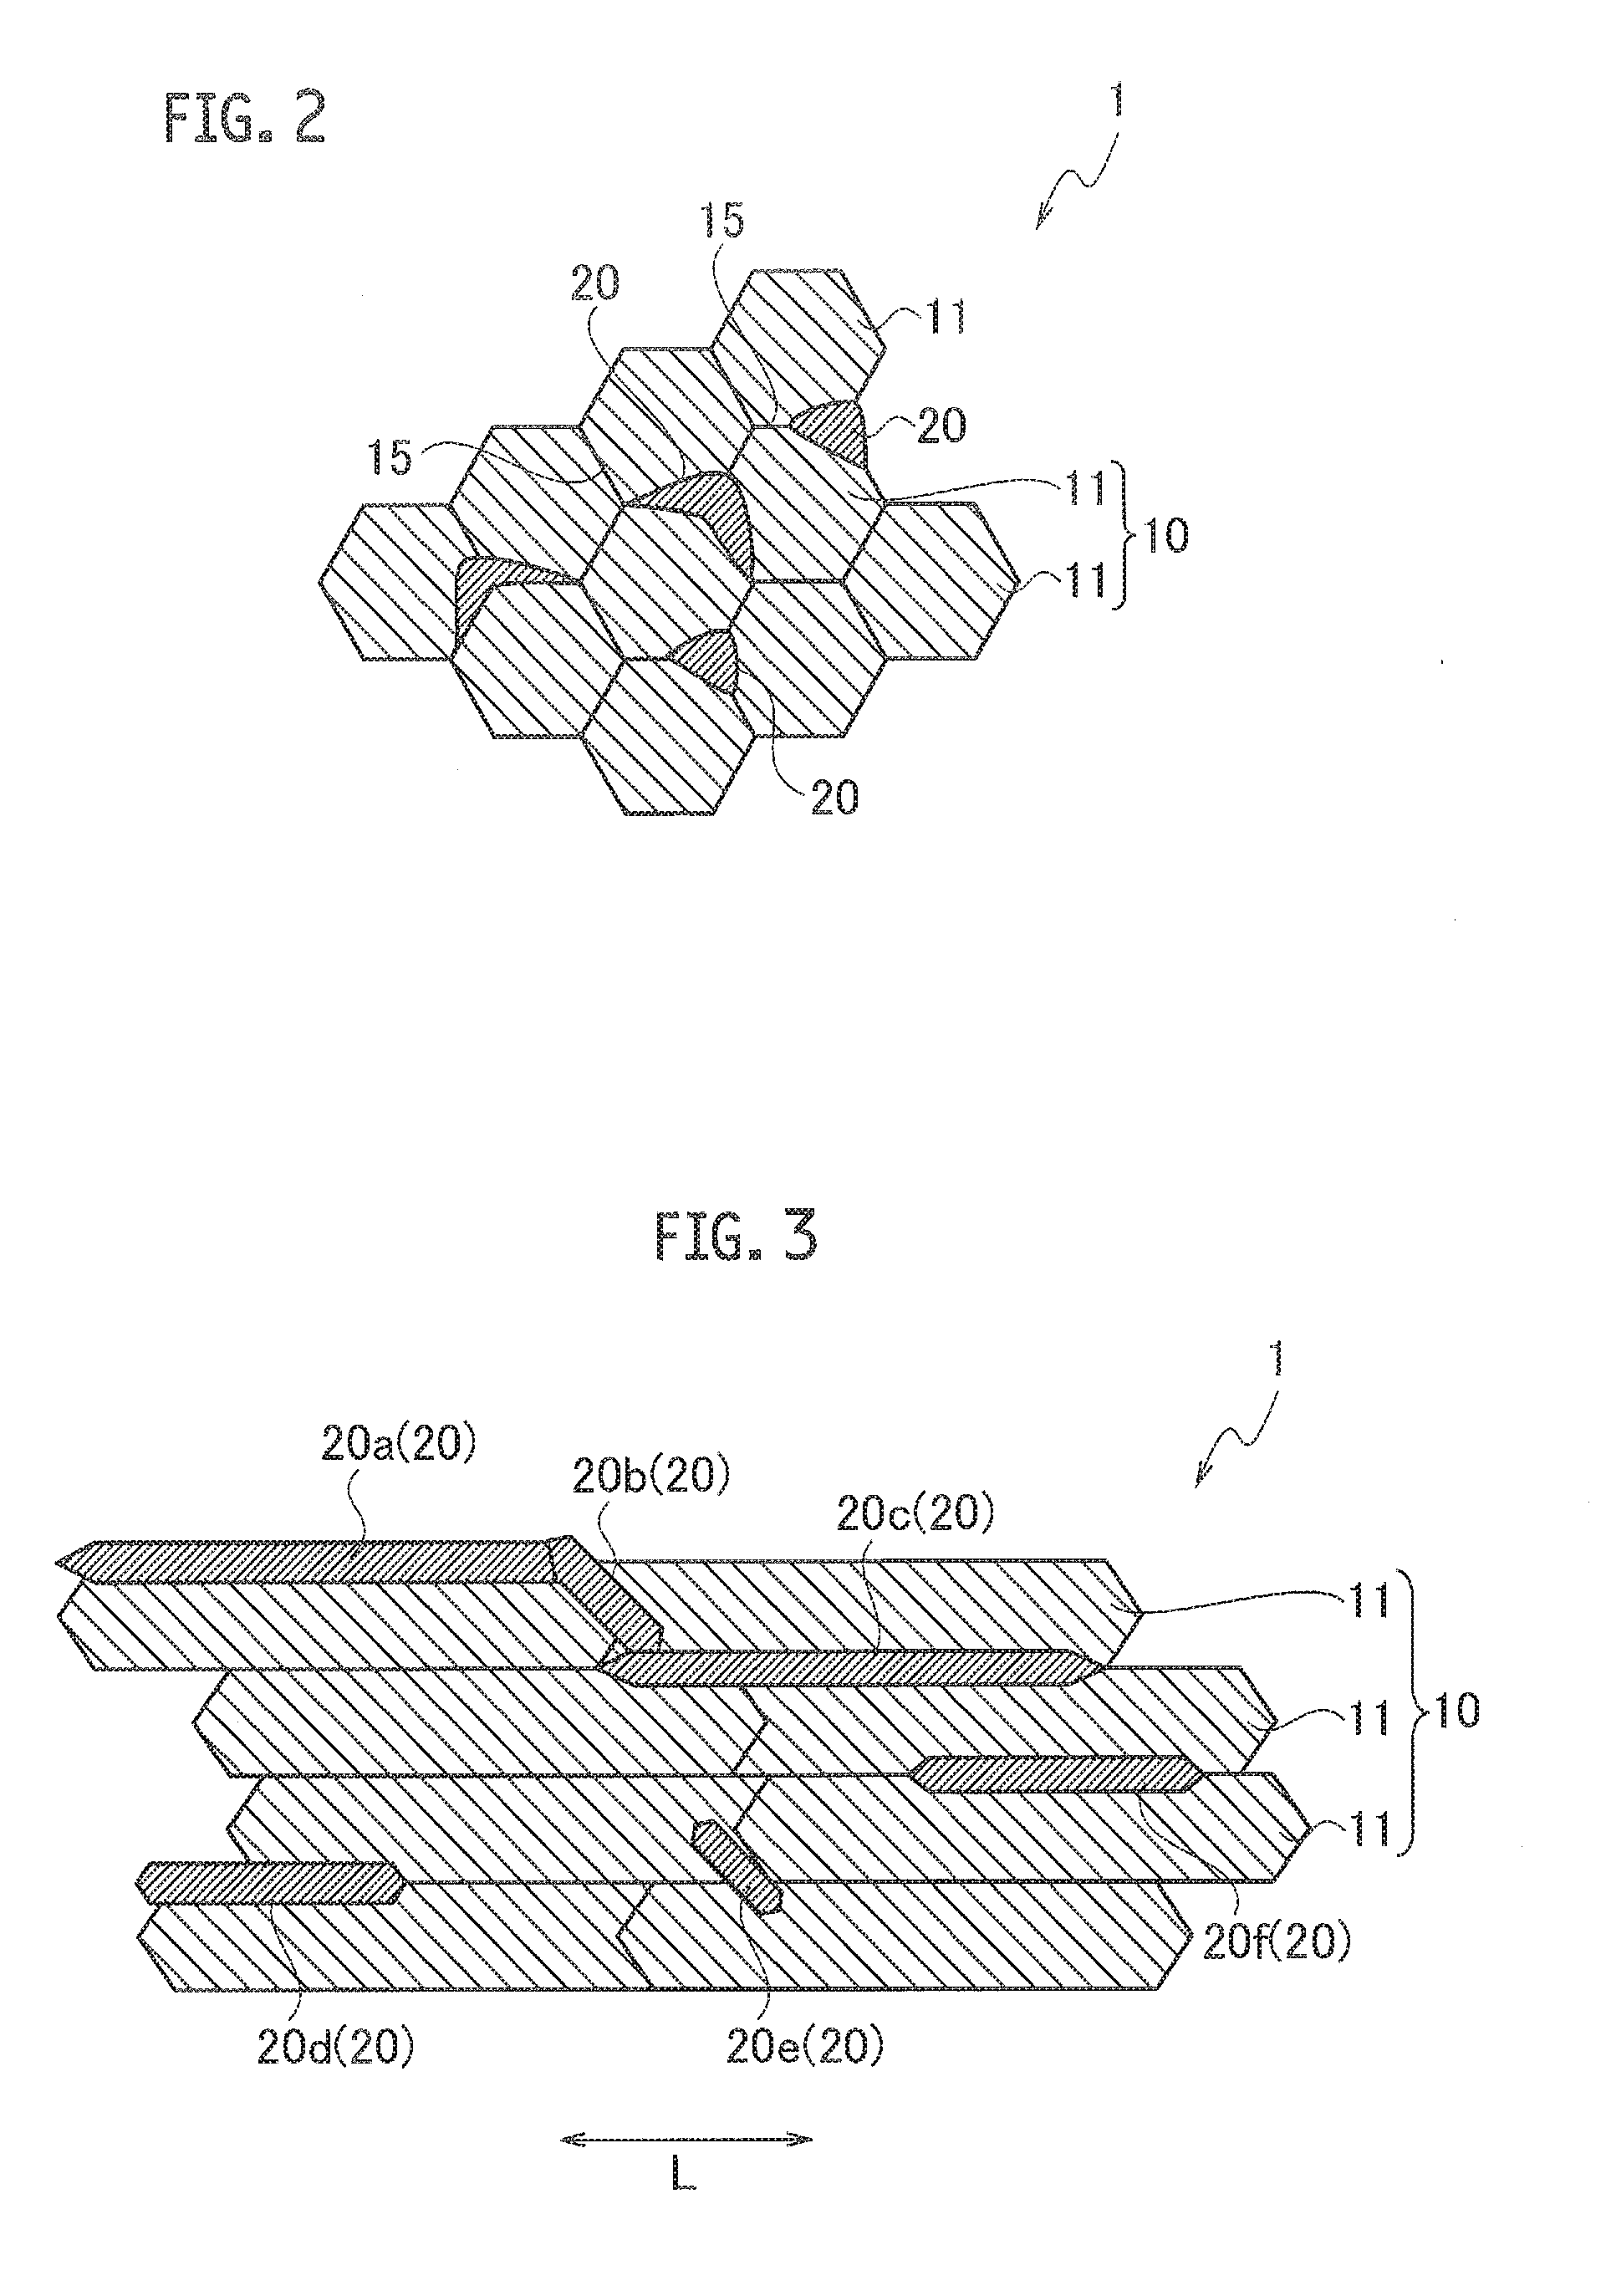 Carbon nanotube composite material and process for producing same